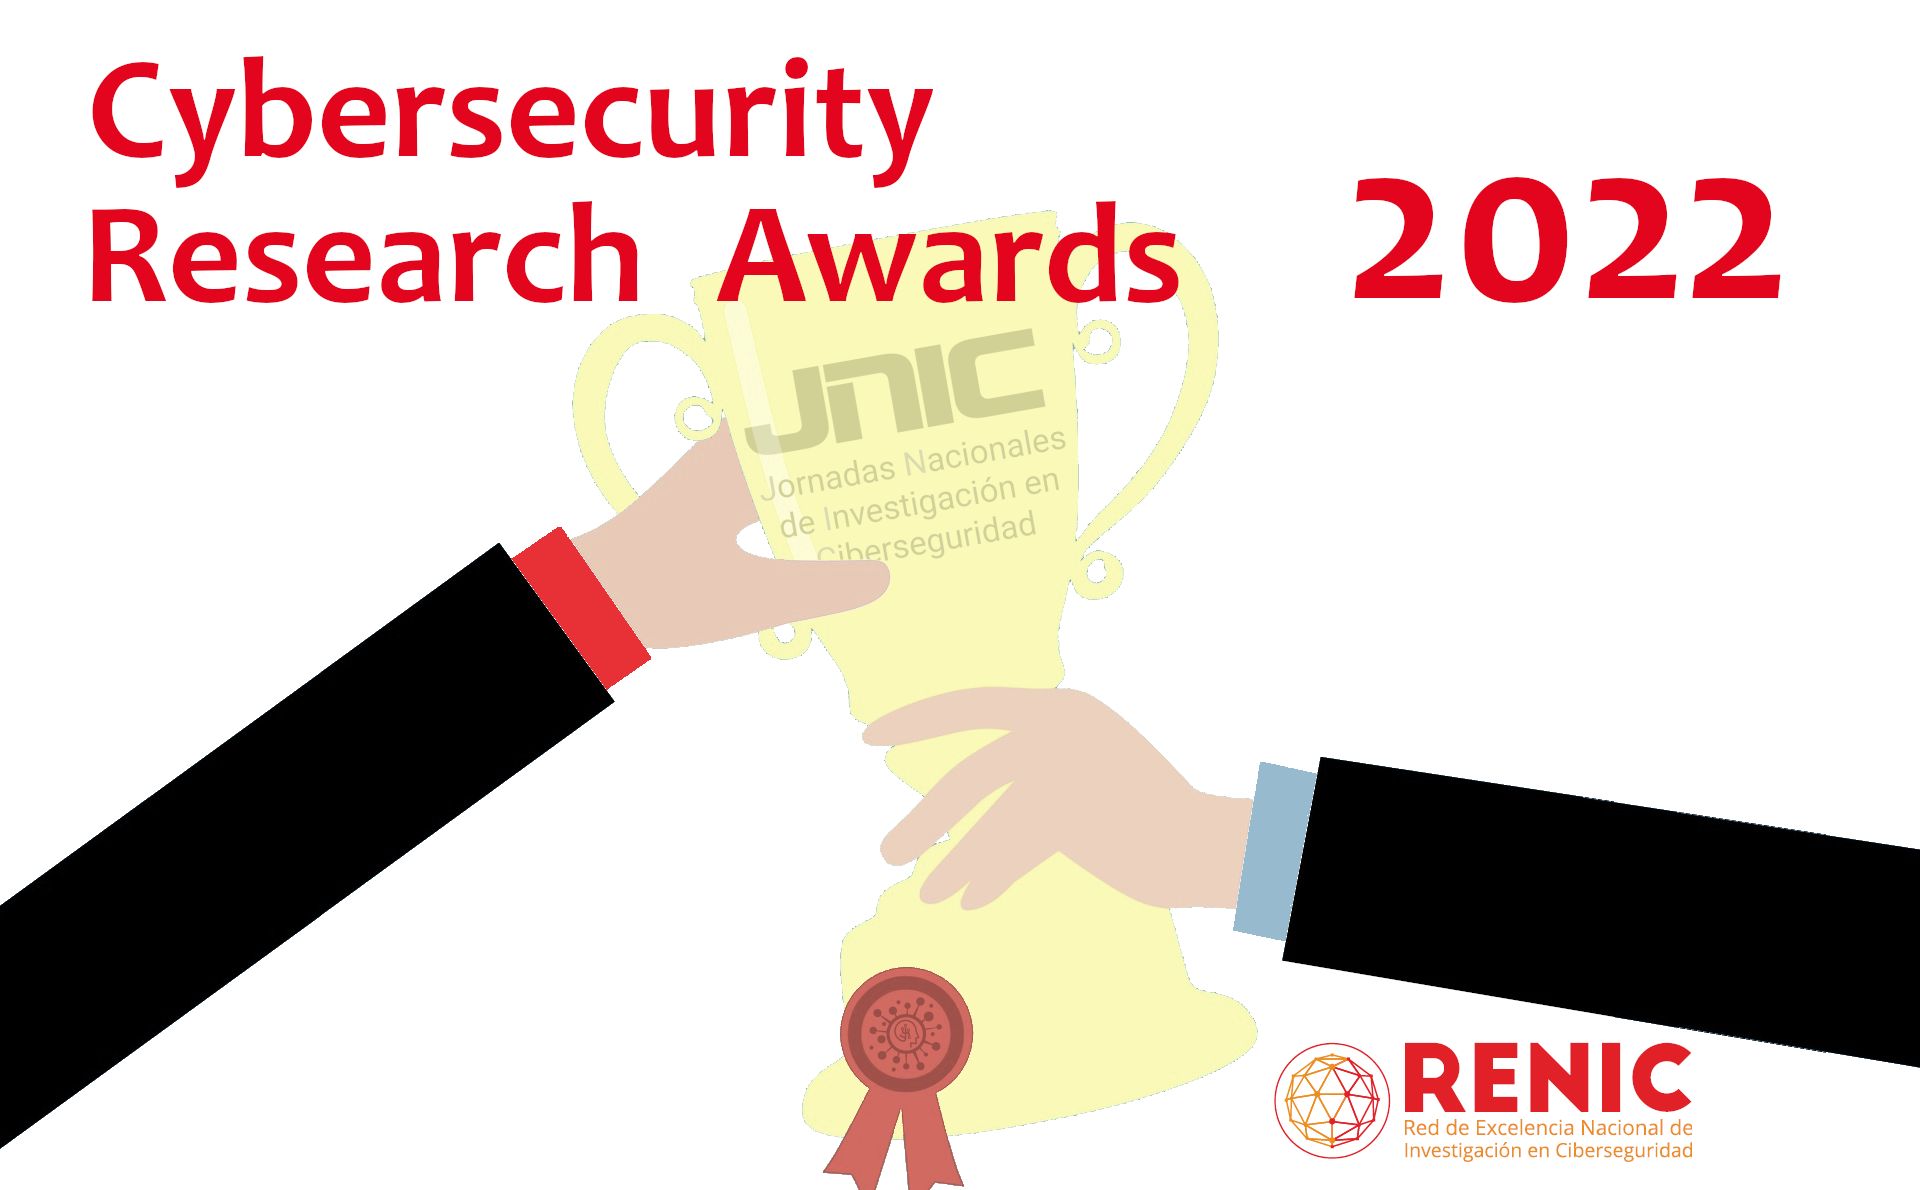 The Winners of the IV Edition of the RENIC Cybersecurity Awards to the Best Doctoral Thesis and Best Final Work of Master